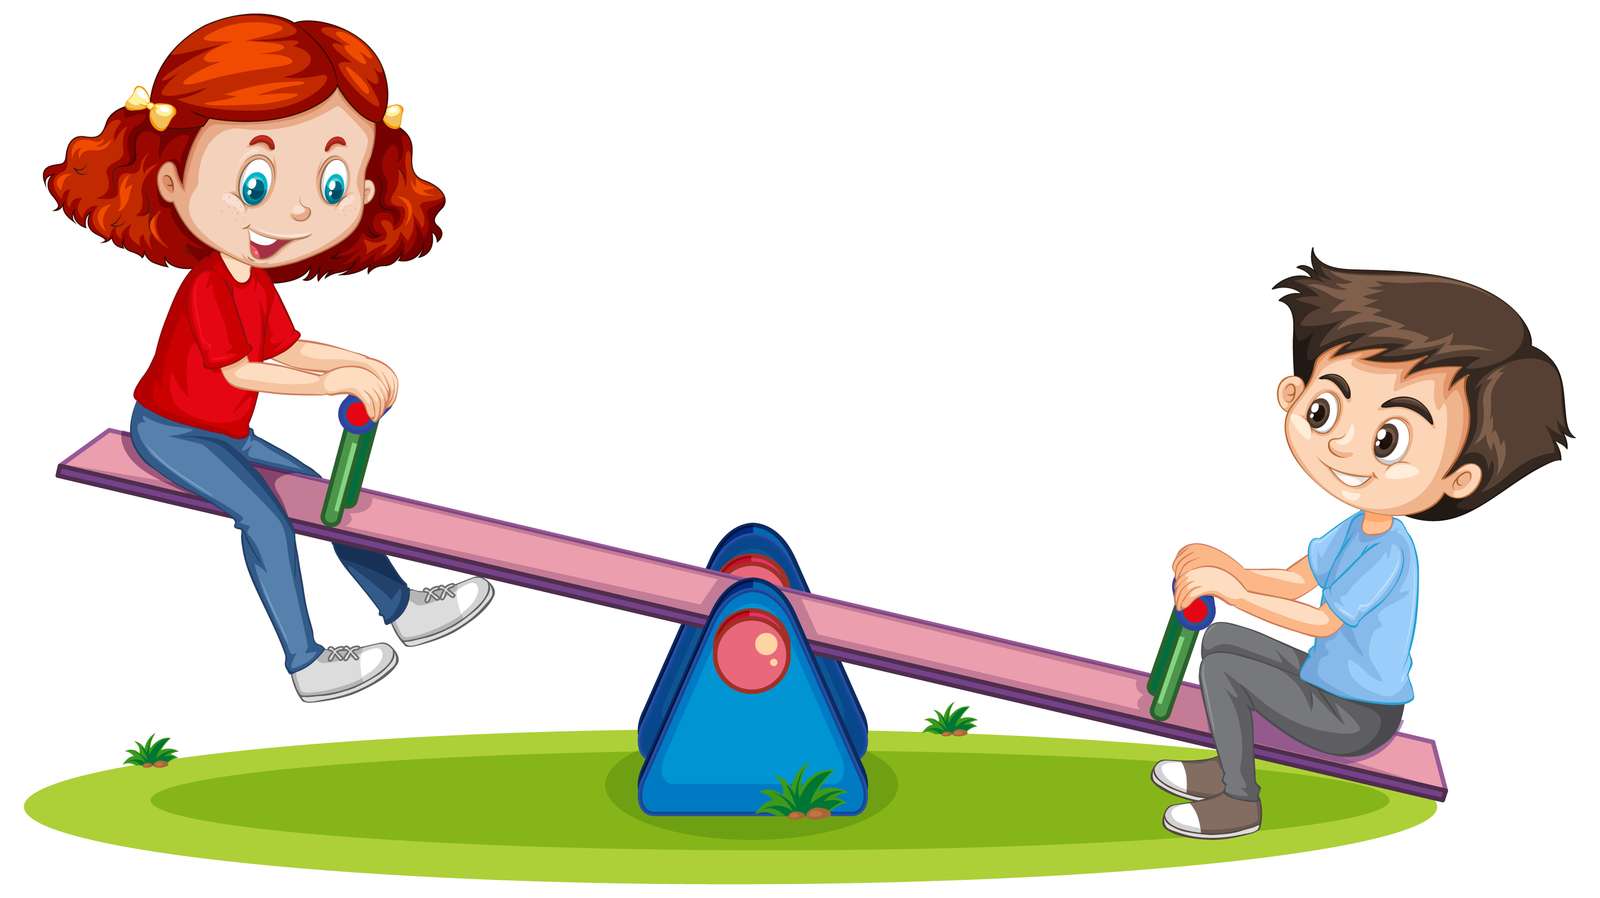 seesaw game puzzle online from photo